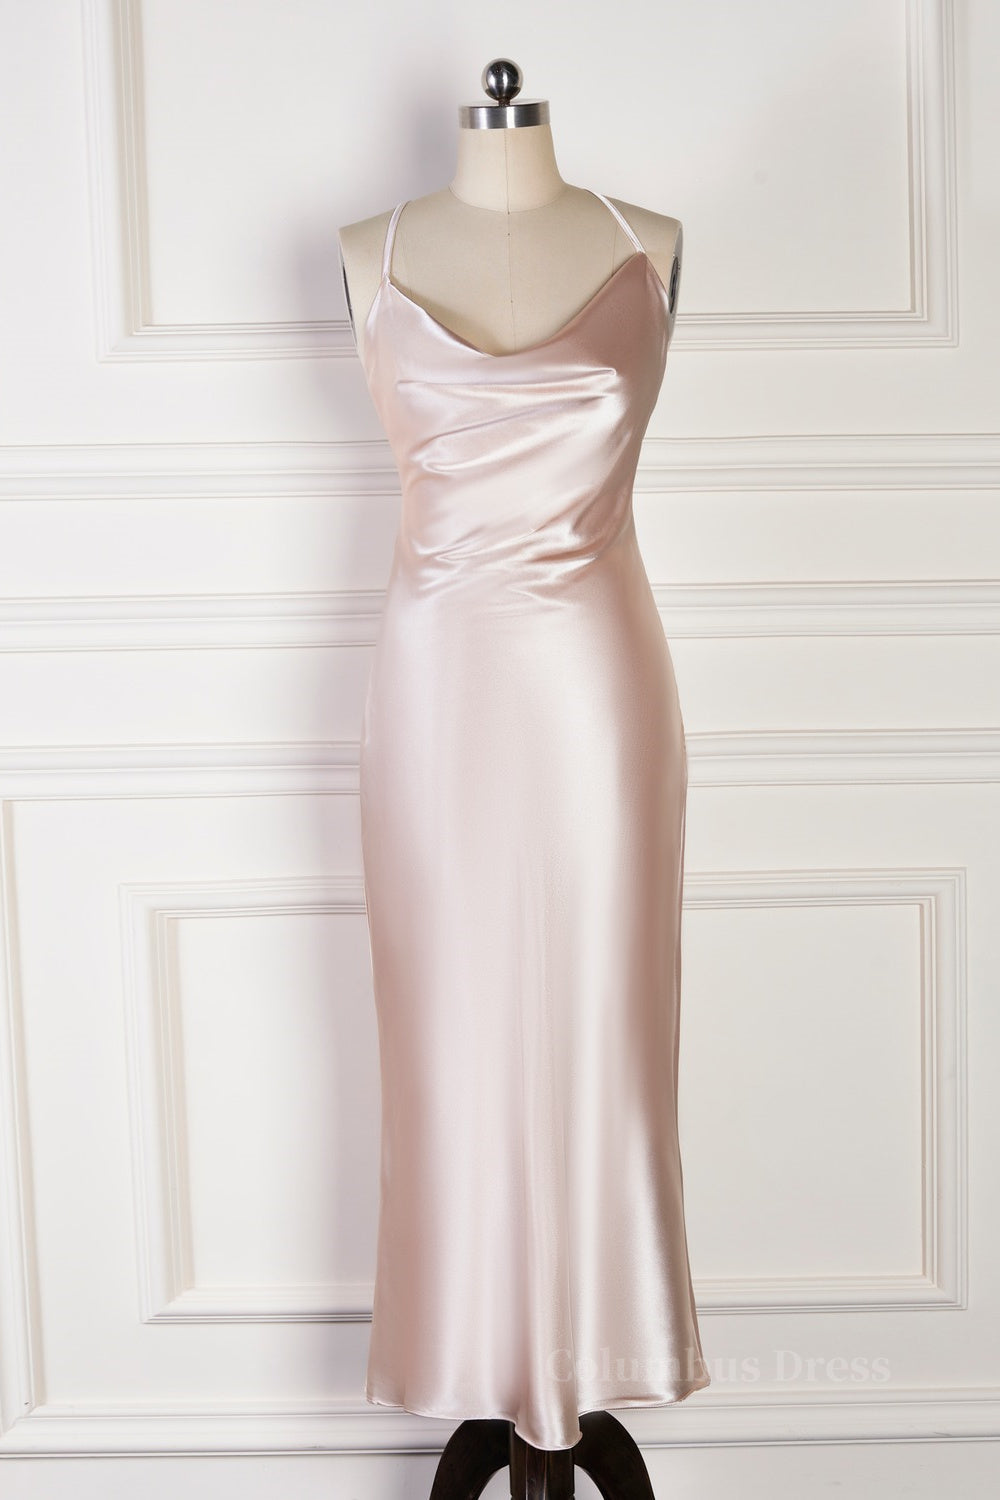 Champagne Mermaid Spaghetti Straps Satin Backless Long Corset Bridesmaid Dress outfit, Party Dresses Styles